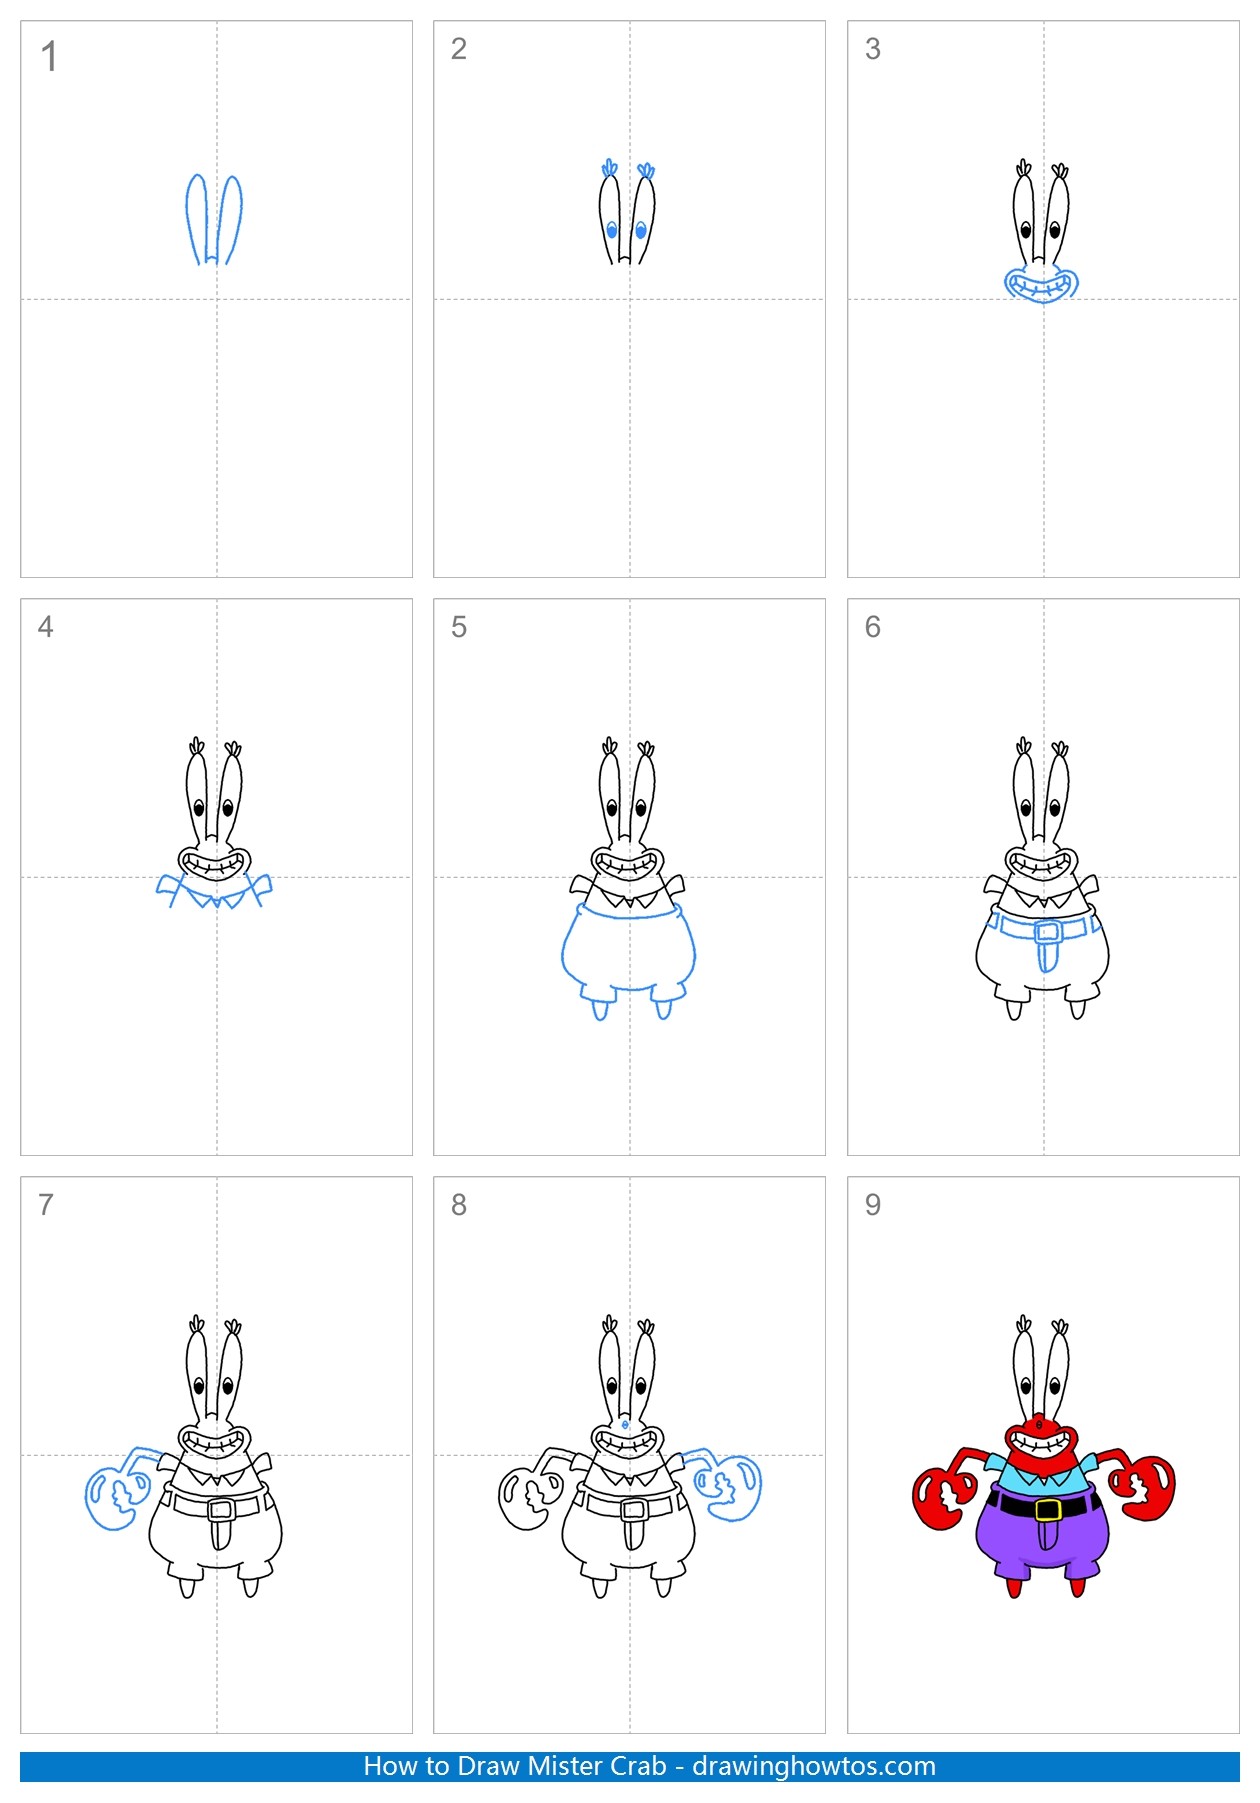 How to Draw Mister Crab Step by Step